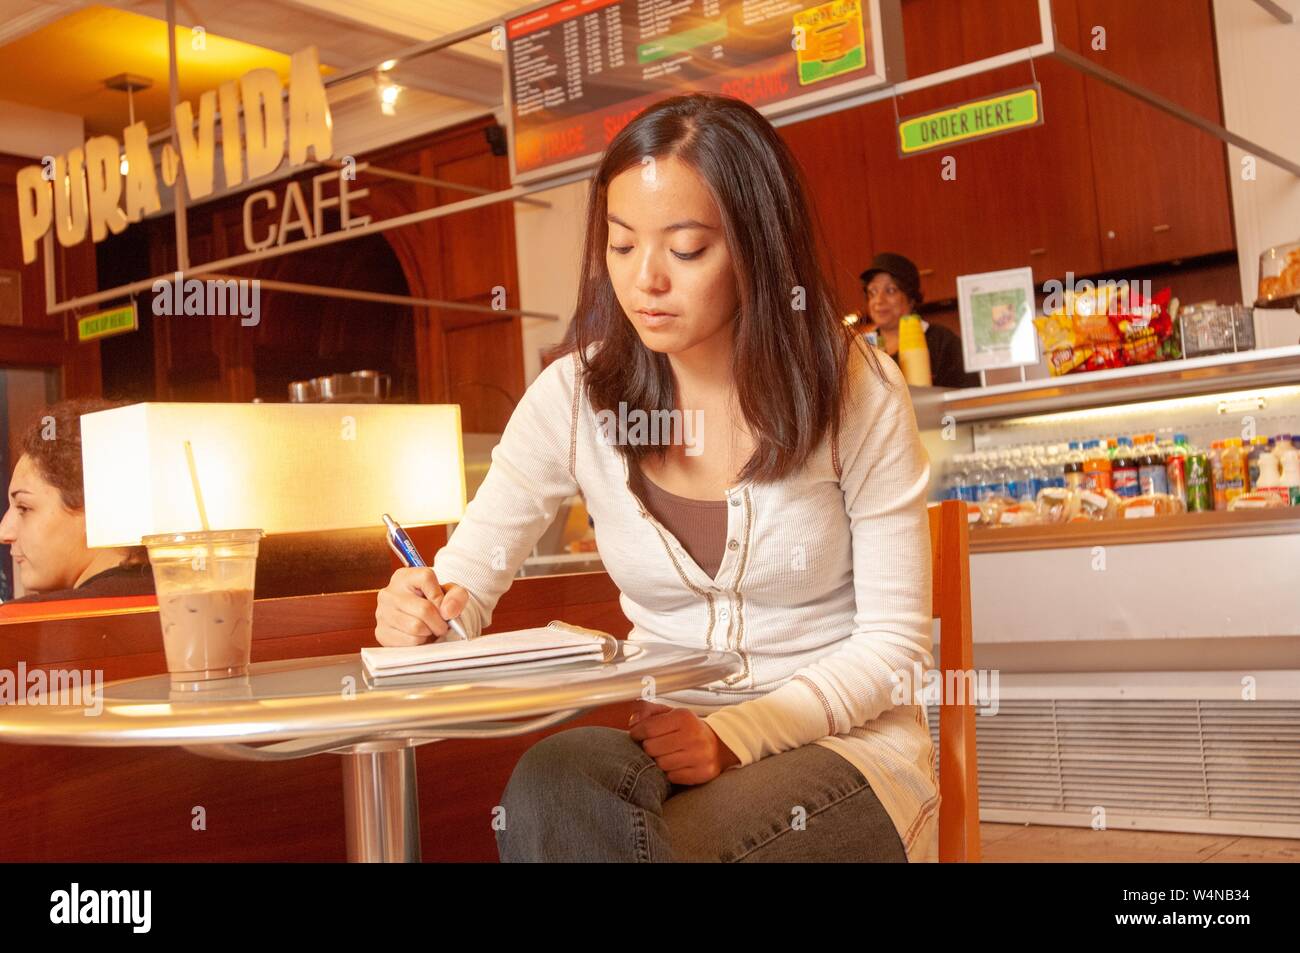 Student sitting at a table in a Pura Vida Cafe and writing notes in a ring binder, at the Johns Hopkins University, Baltimore, Maryland, October 12, 2007. From the Homewood Photography Collection. () Stock Photo